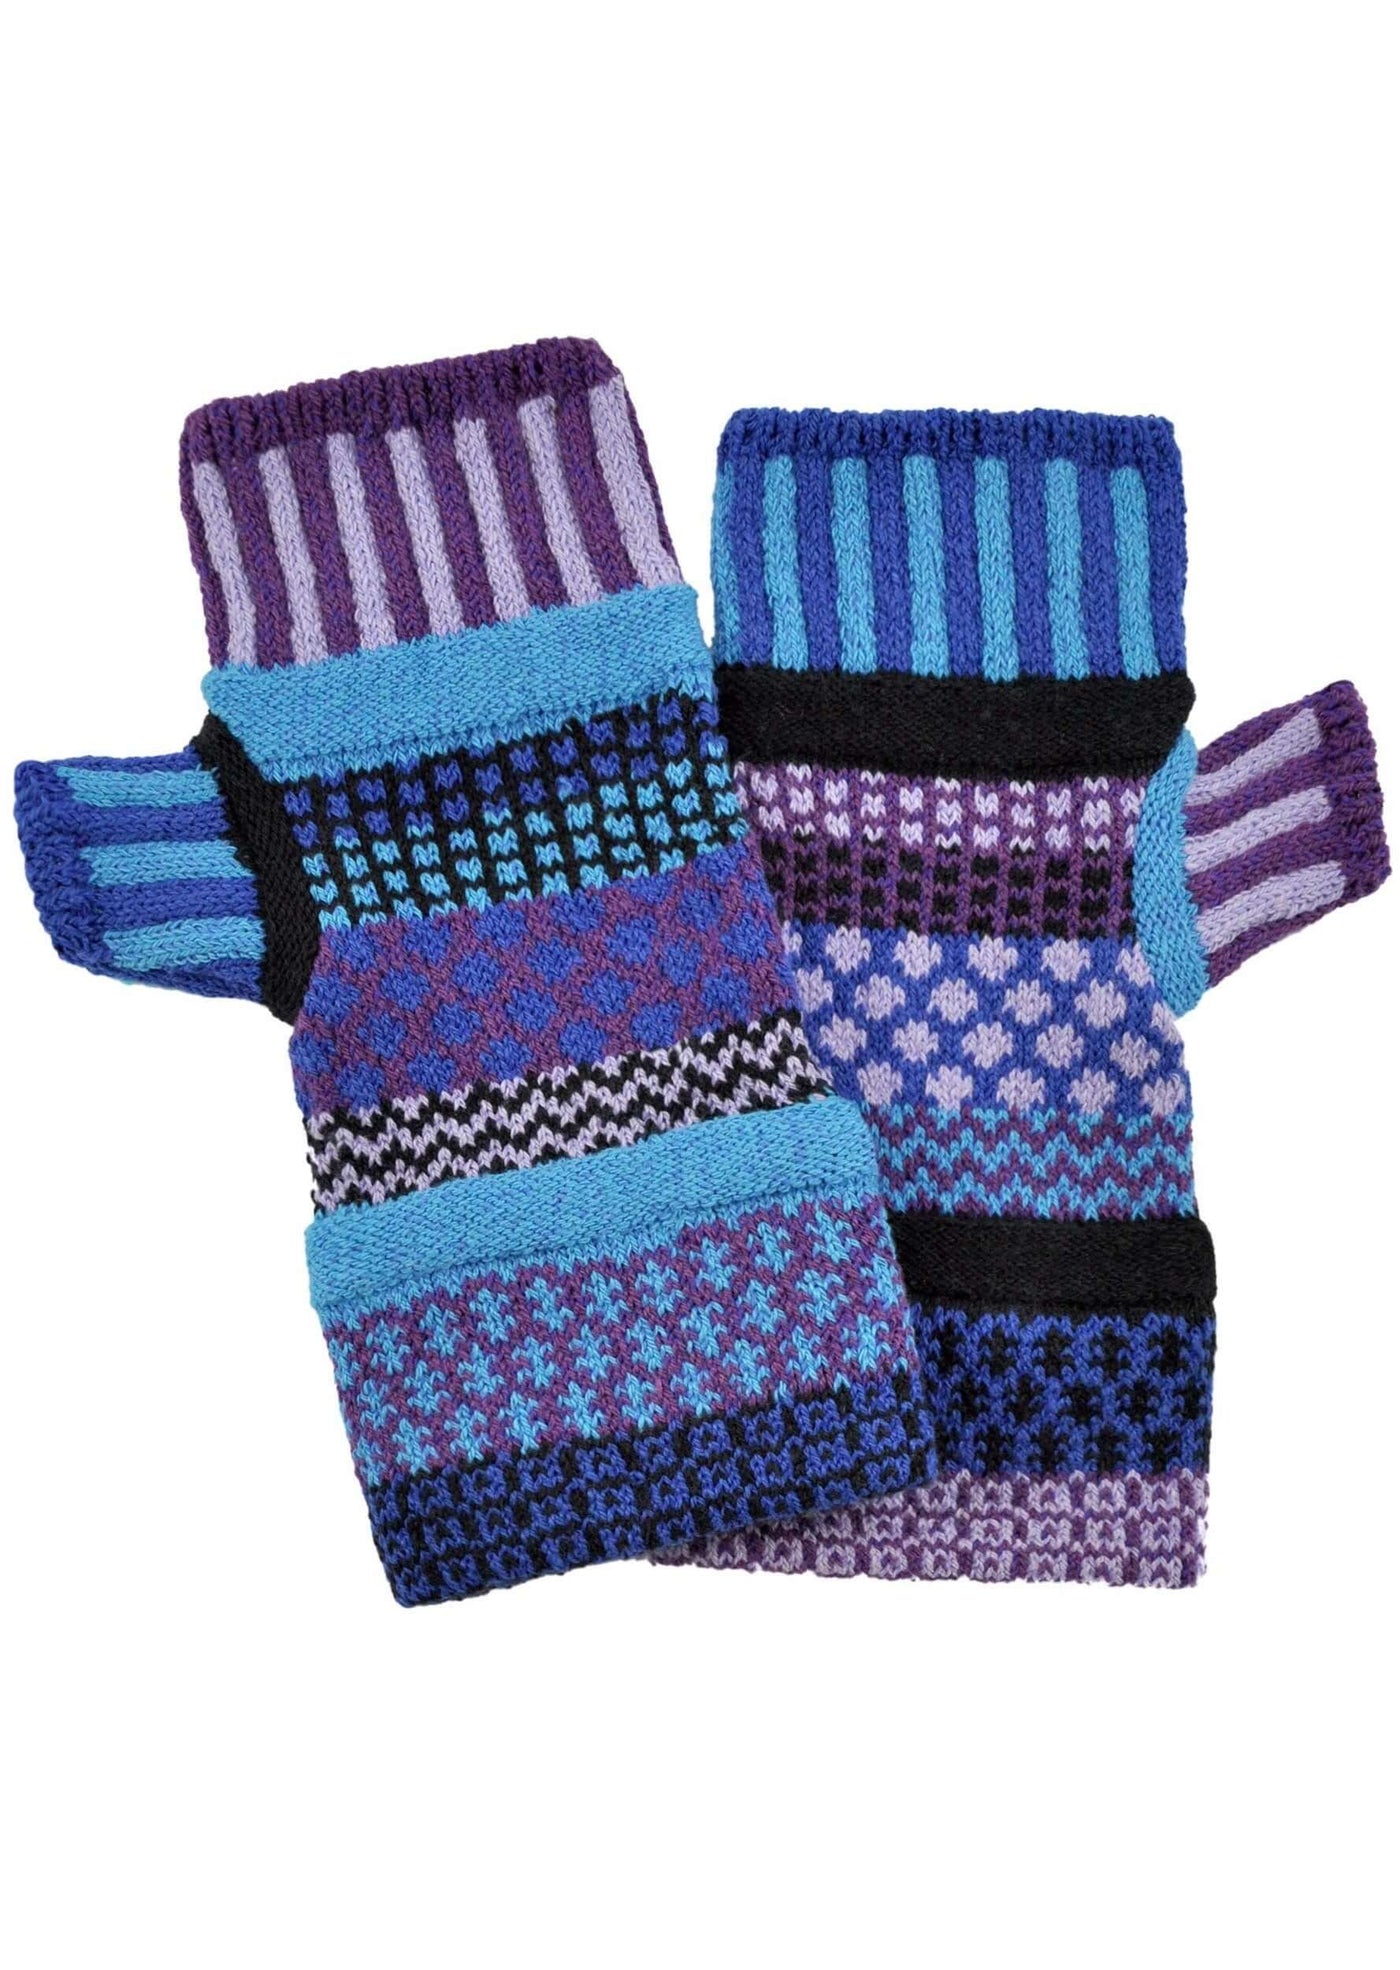 Solmate RASPBERRY Knitted Fingerless Mittens with Colors: turquoise, purple, black, lilac, royal blue. | Made in USA | Classy Cozy Cool Women's Made in America Clothing Boutique